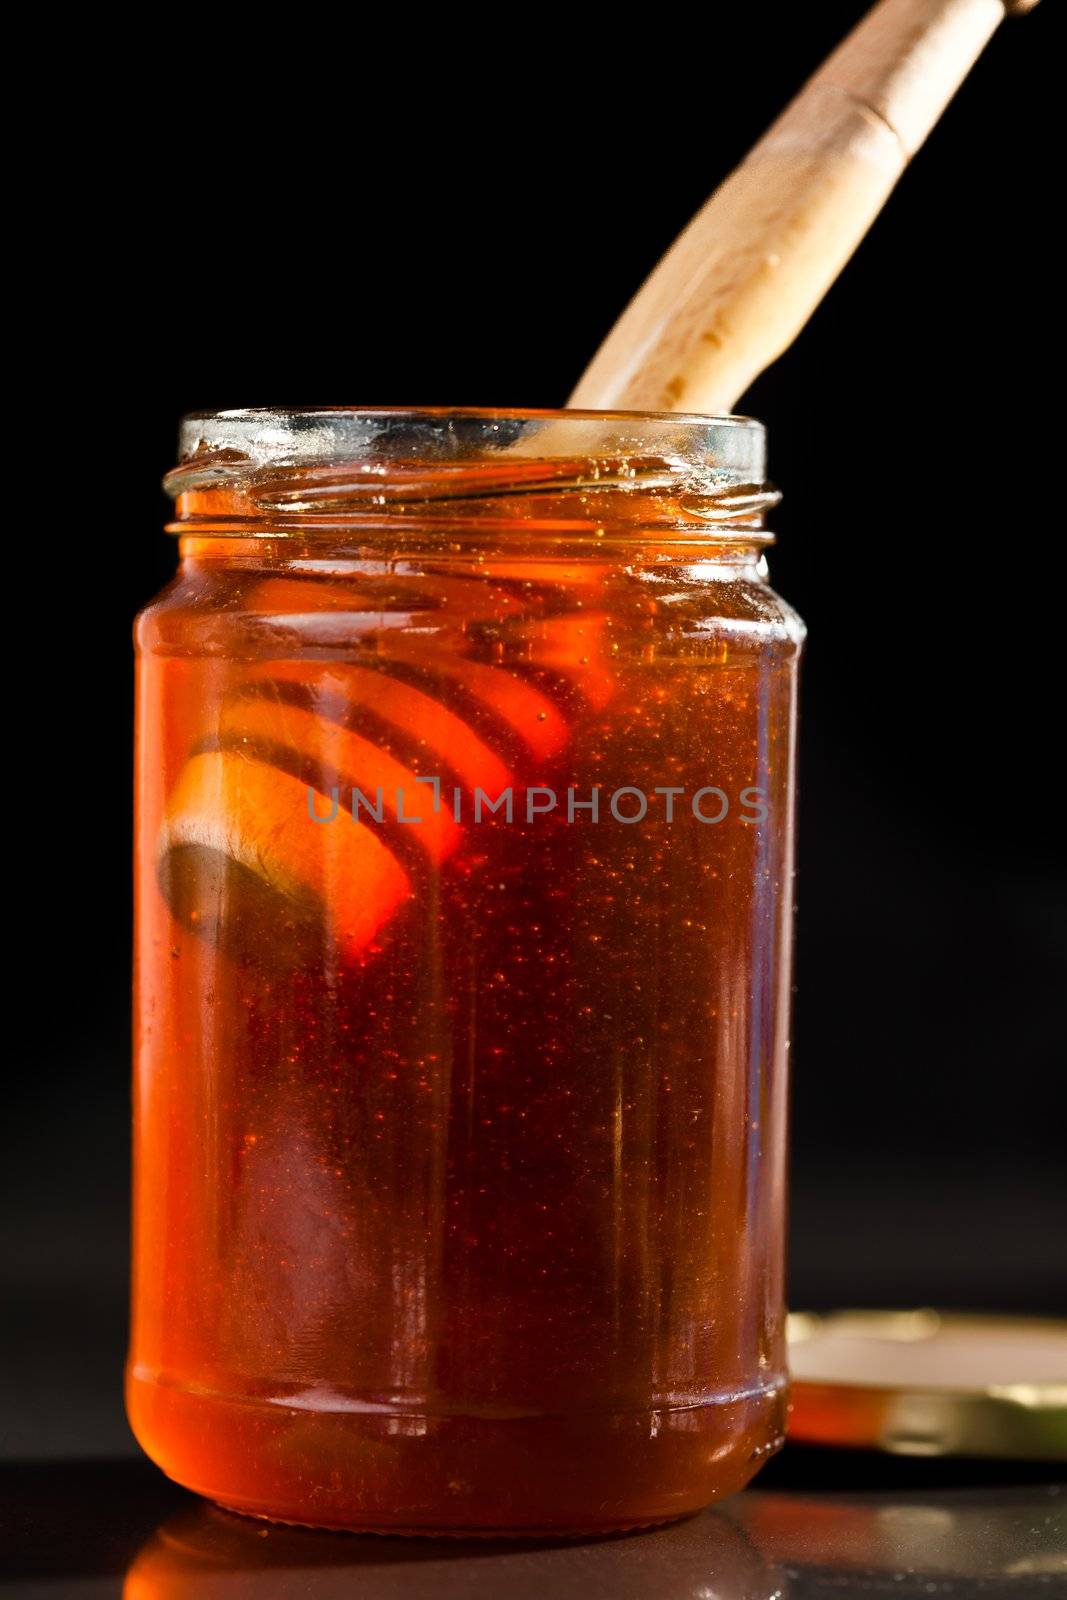 Honey full jar with a honey dipper against a black background